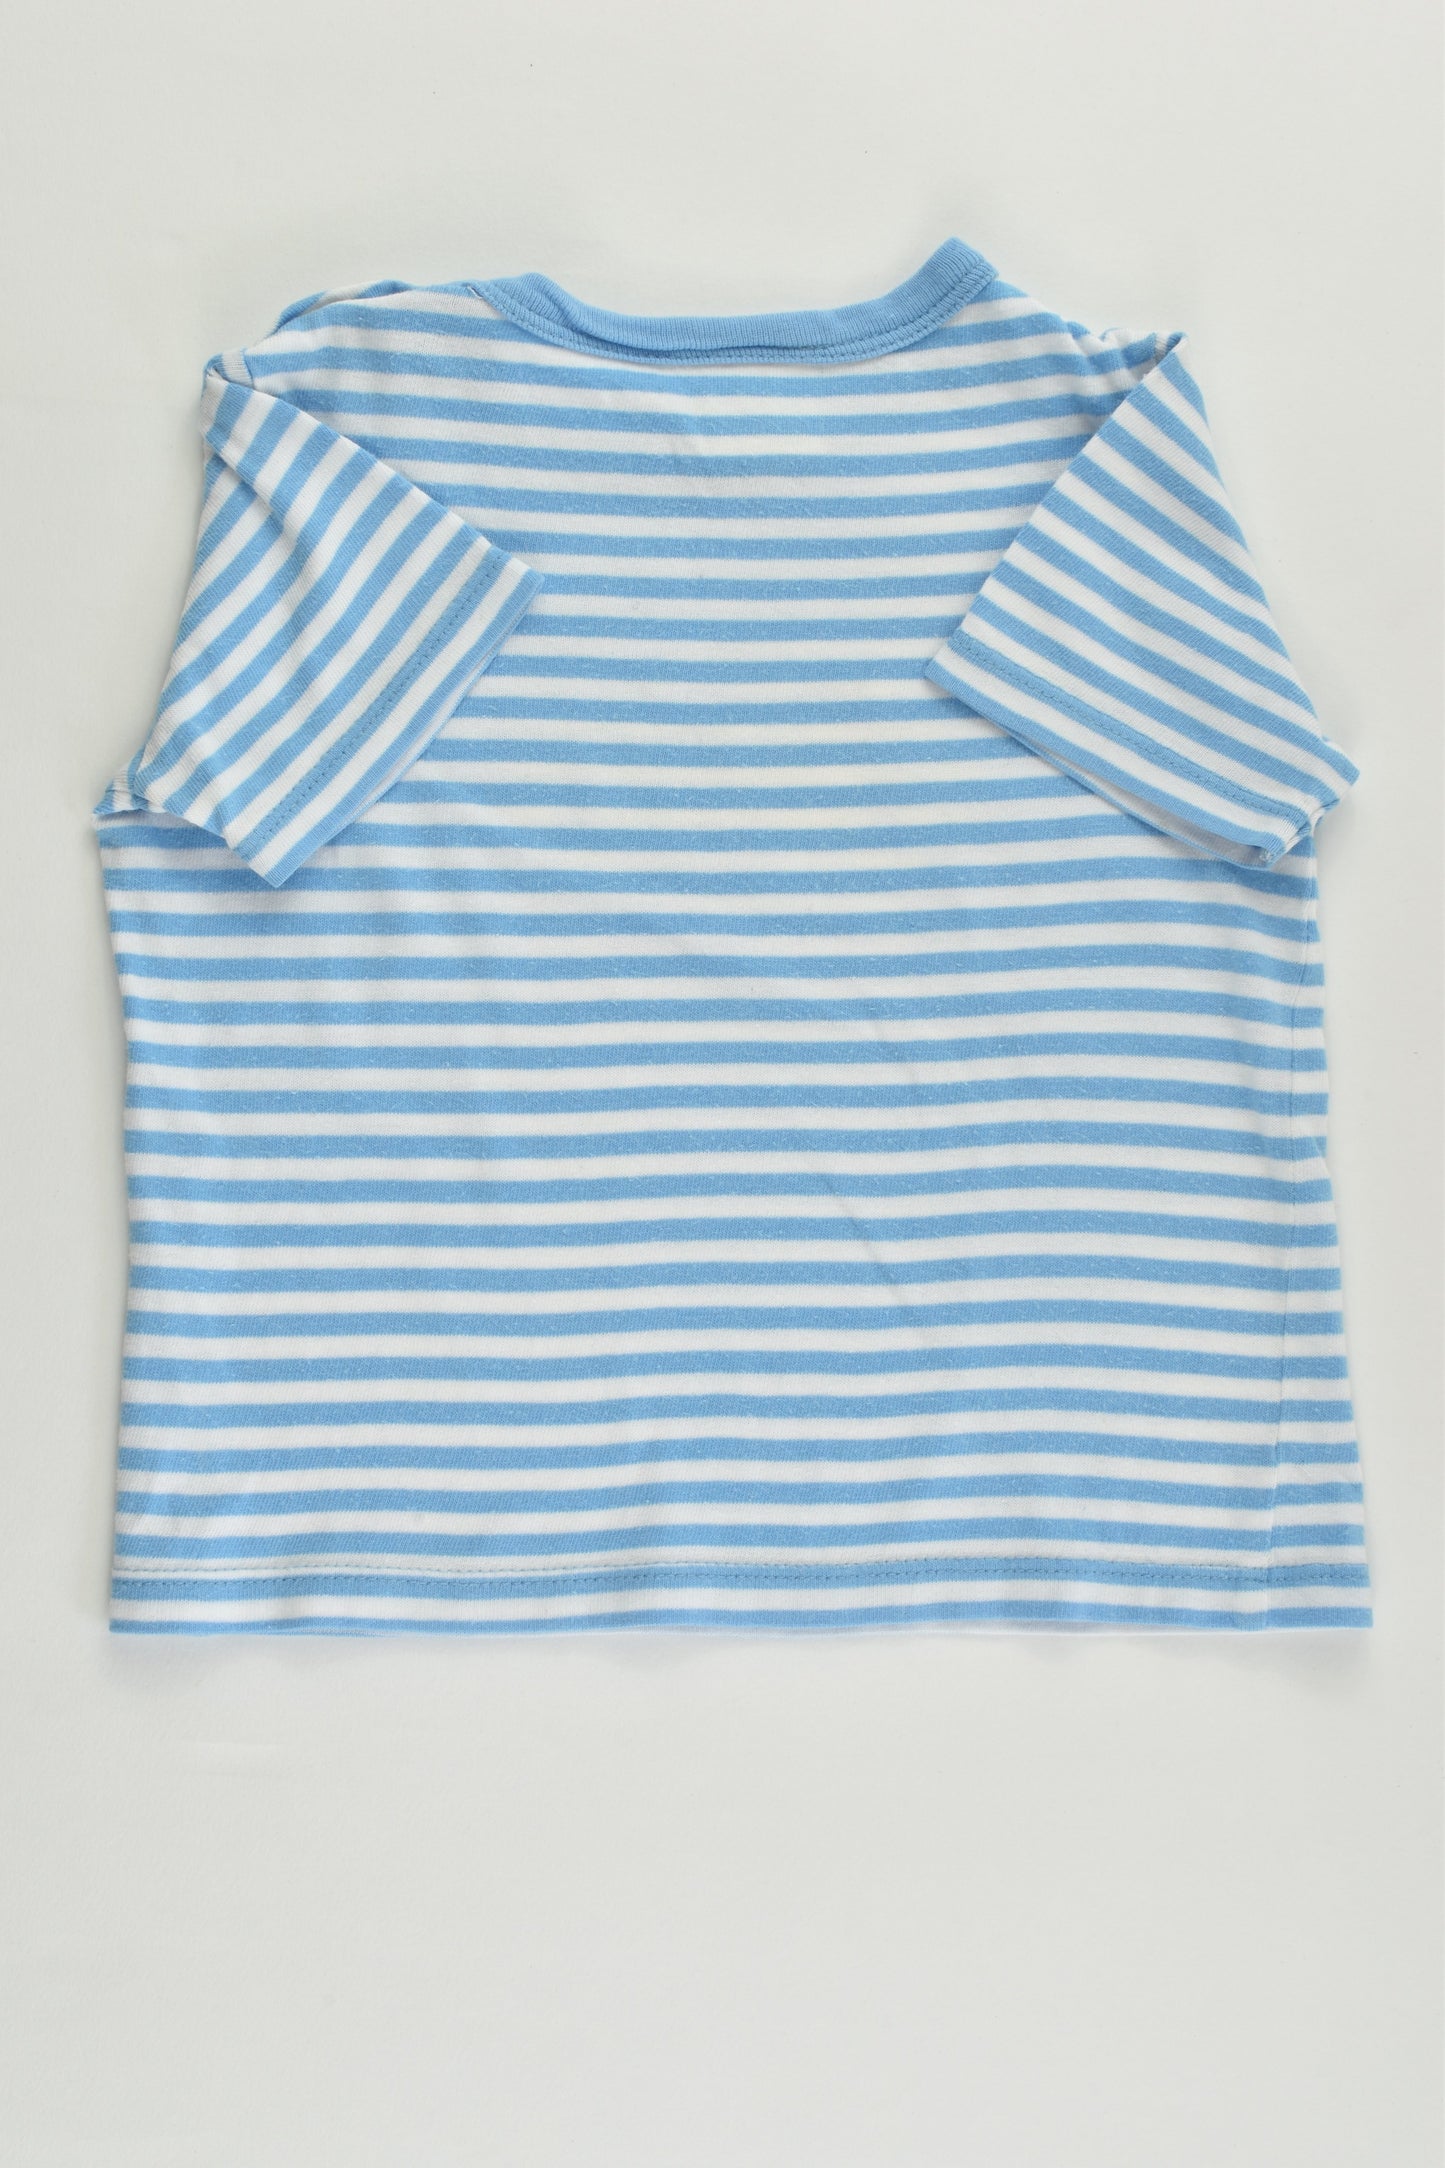 Seed Size 00 (3-6 months) Striped Car T-shirt